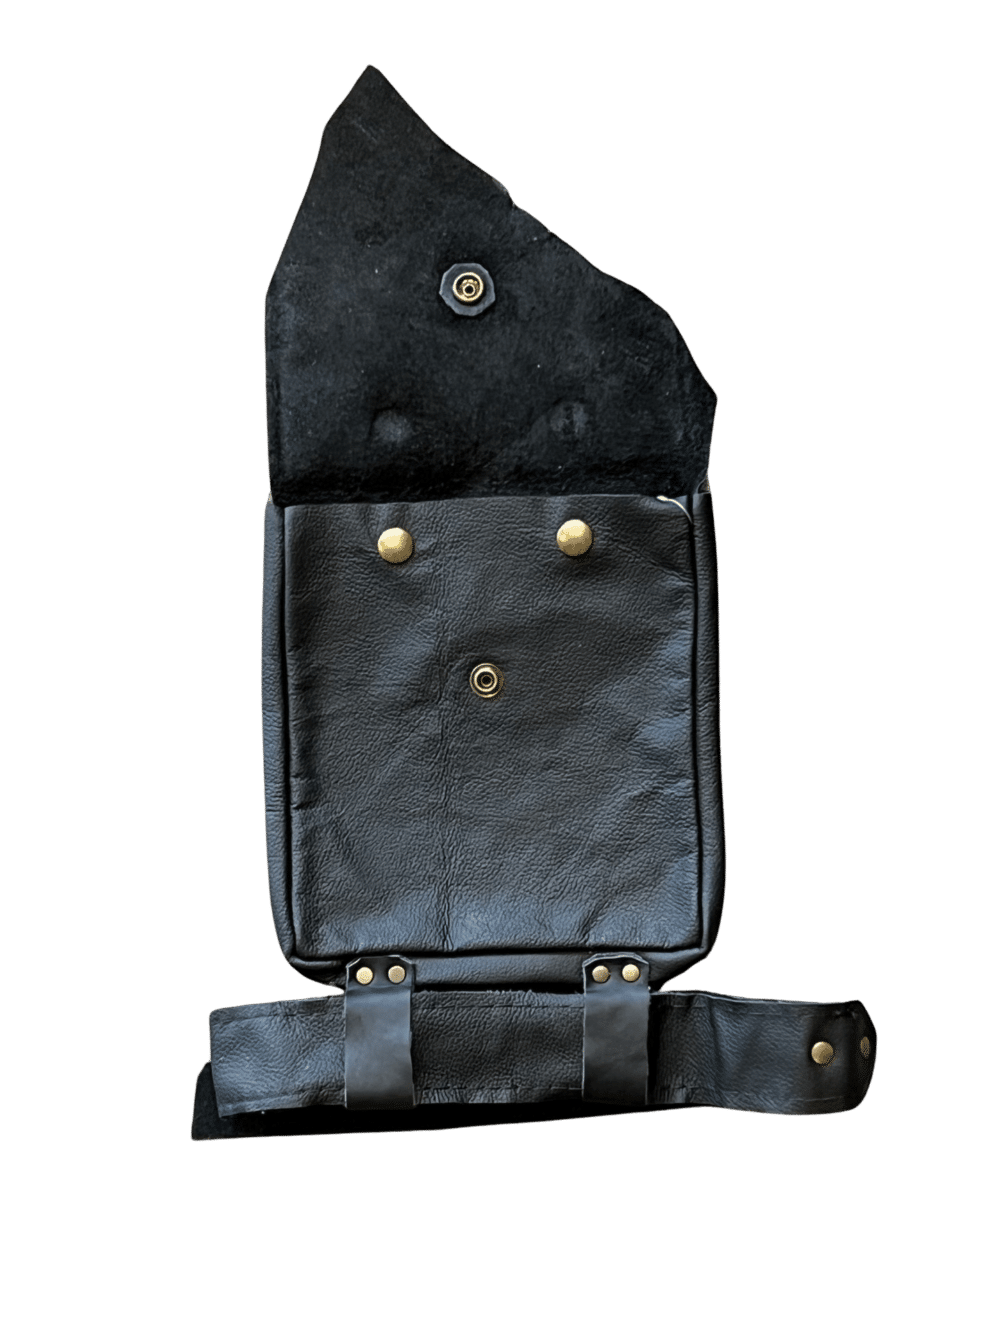 A Leather Unisex Thigh Bag that slides onto a belt, and then wraps around the leg for support. One big pocket to hold all of your daily essentials.